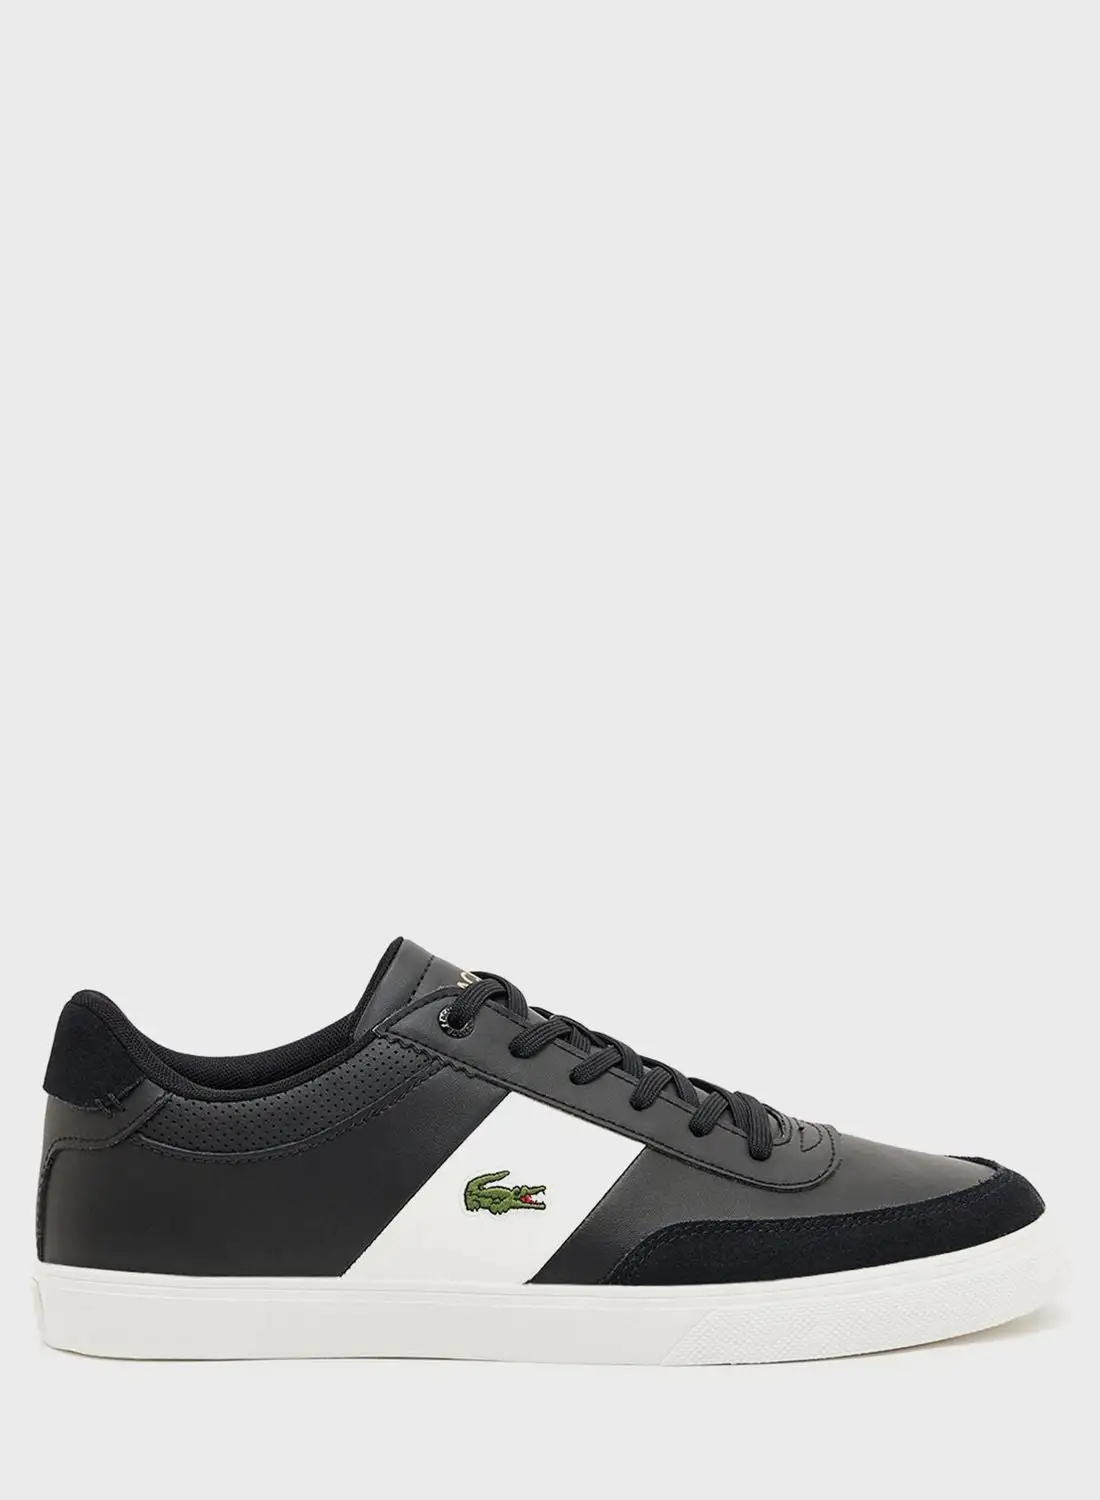 LACOSTE Courtmaster Pro Sneakers